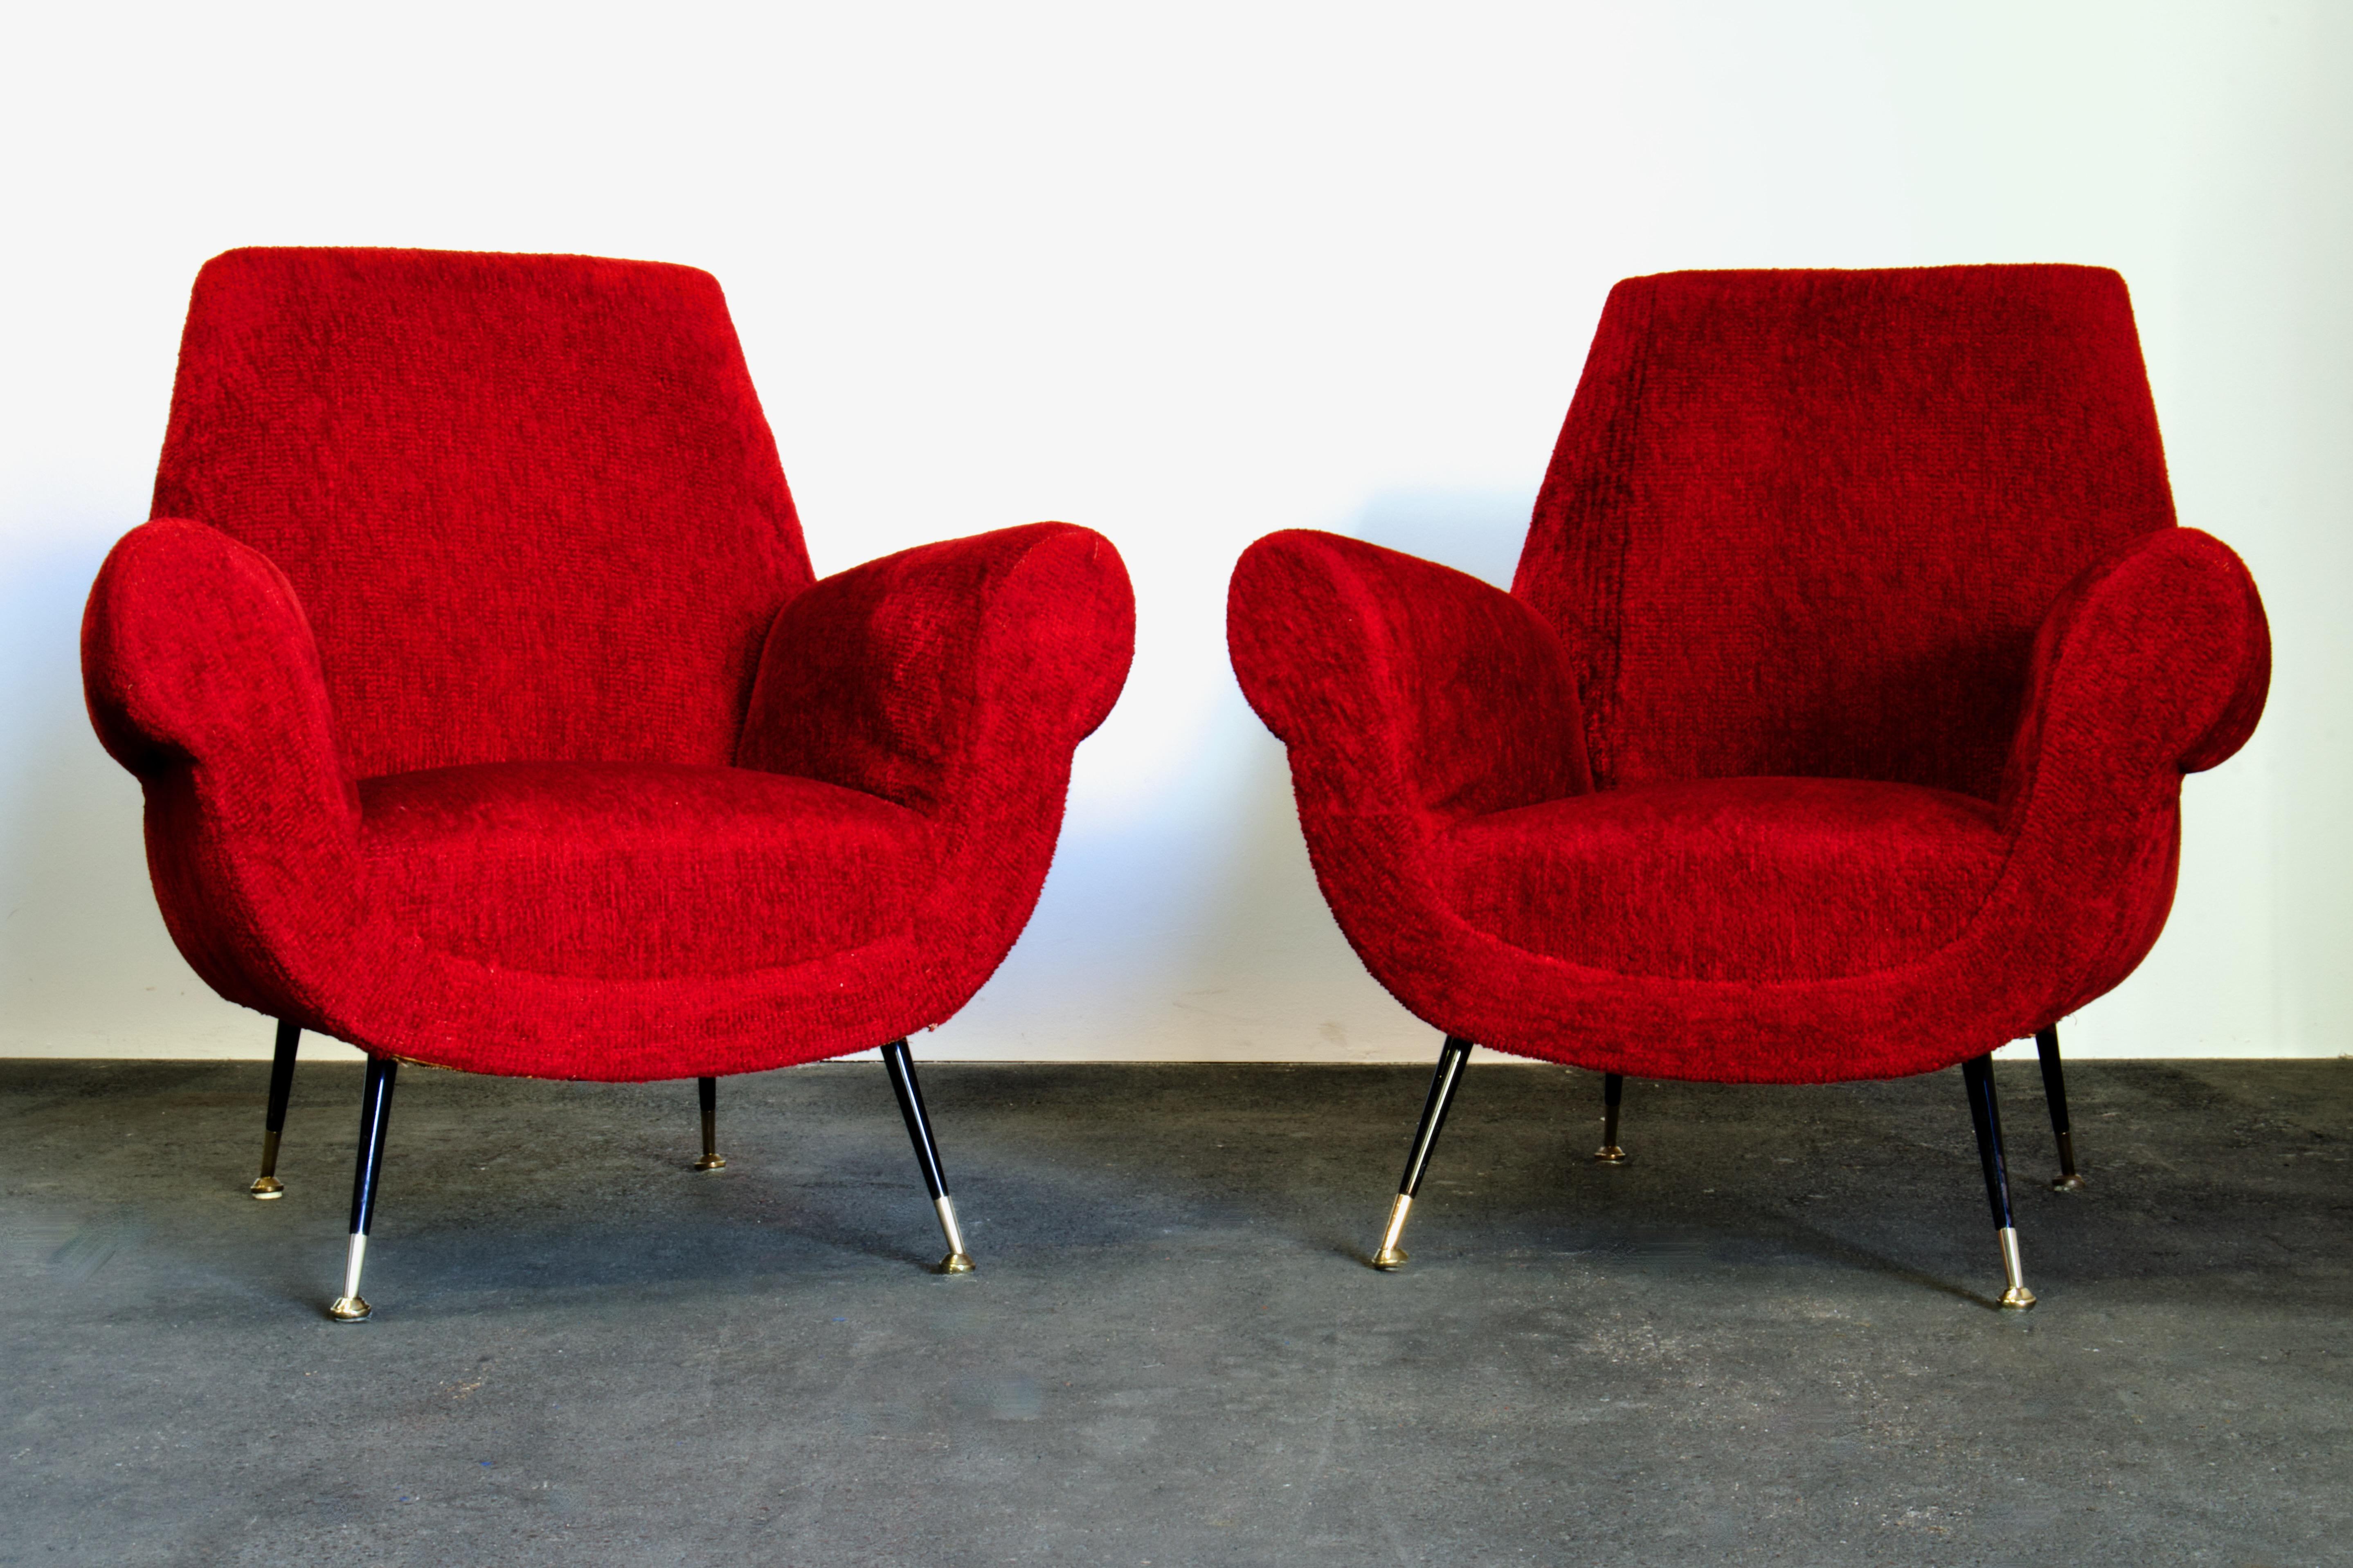 Pair of original Mid-Century Modern Italian armchairs designed by Luigi (Gigi) Radice for Minotti, Italy in the 1950s. A design that defined an important period of Italian design, it is evocative of contemporaneous designs by Gio Ponti and Ico